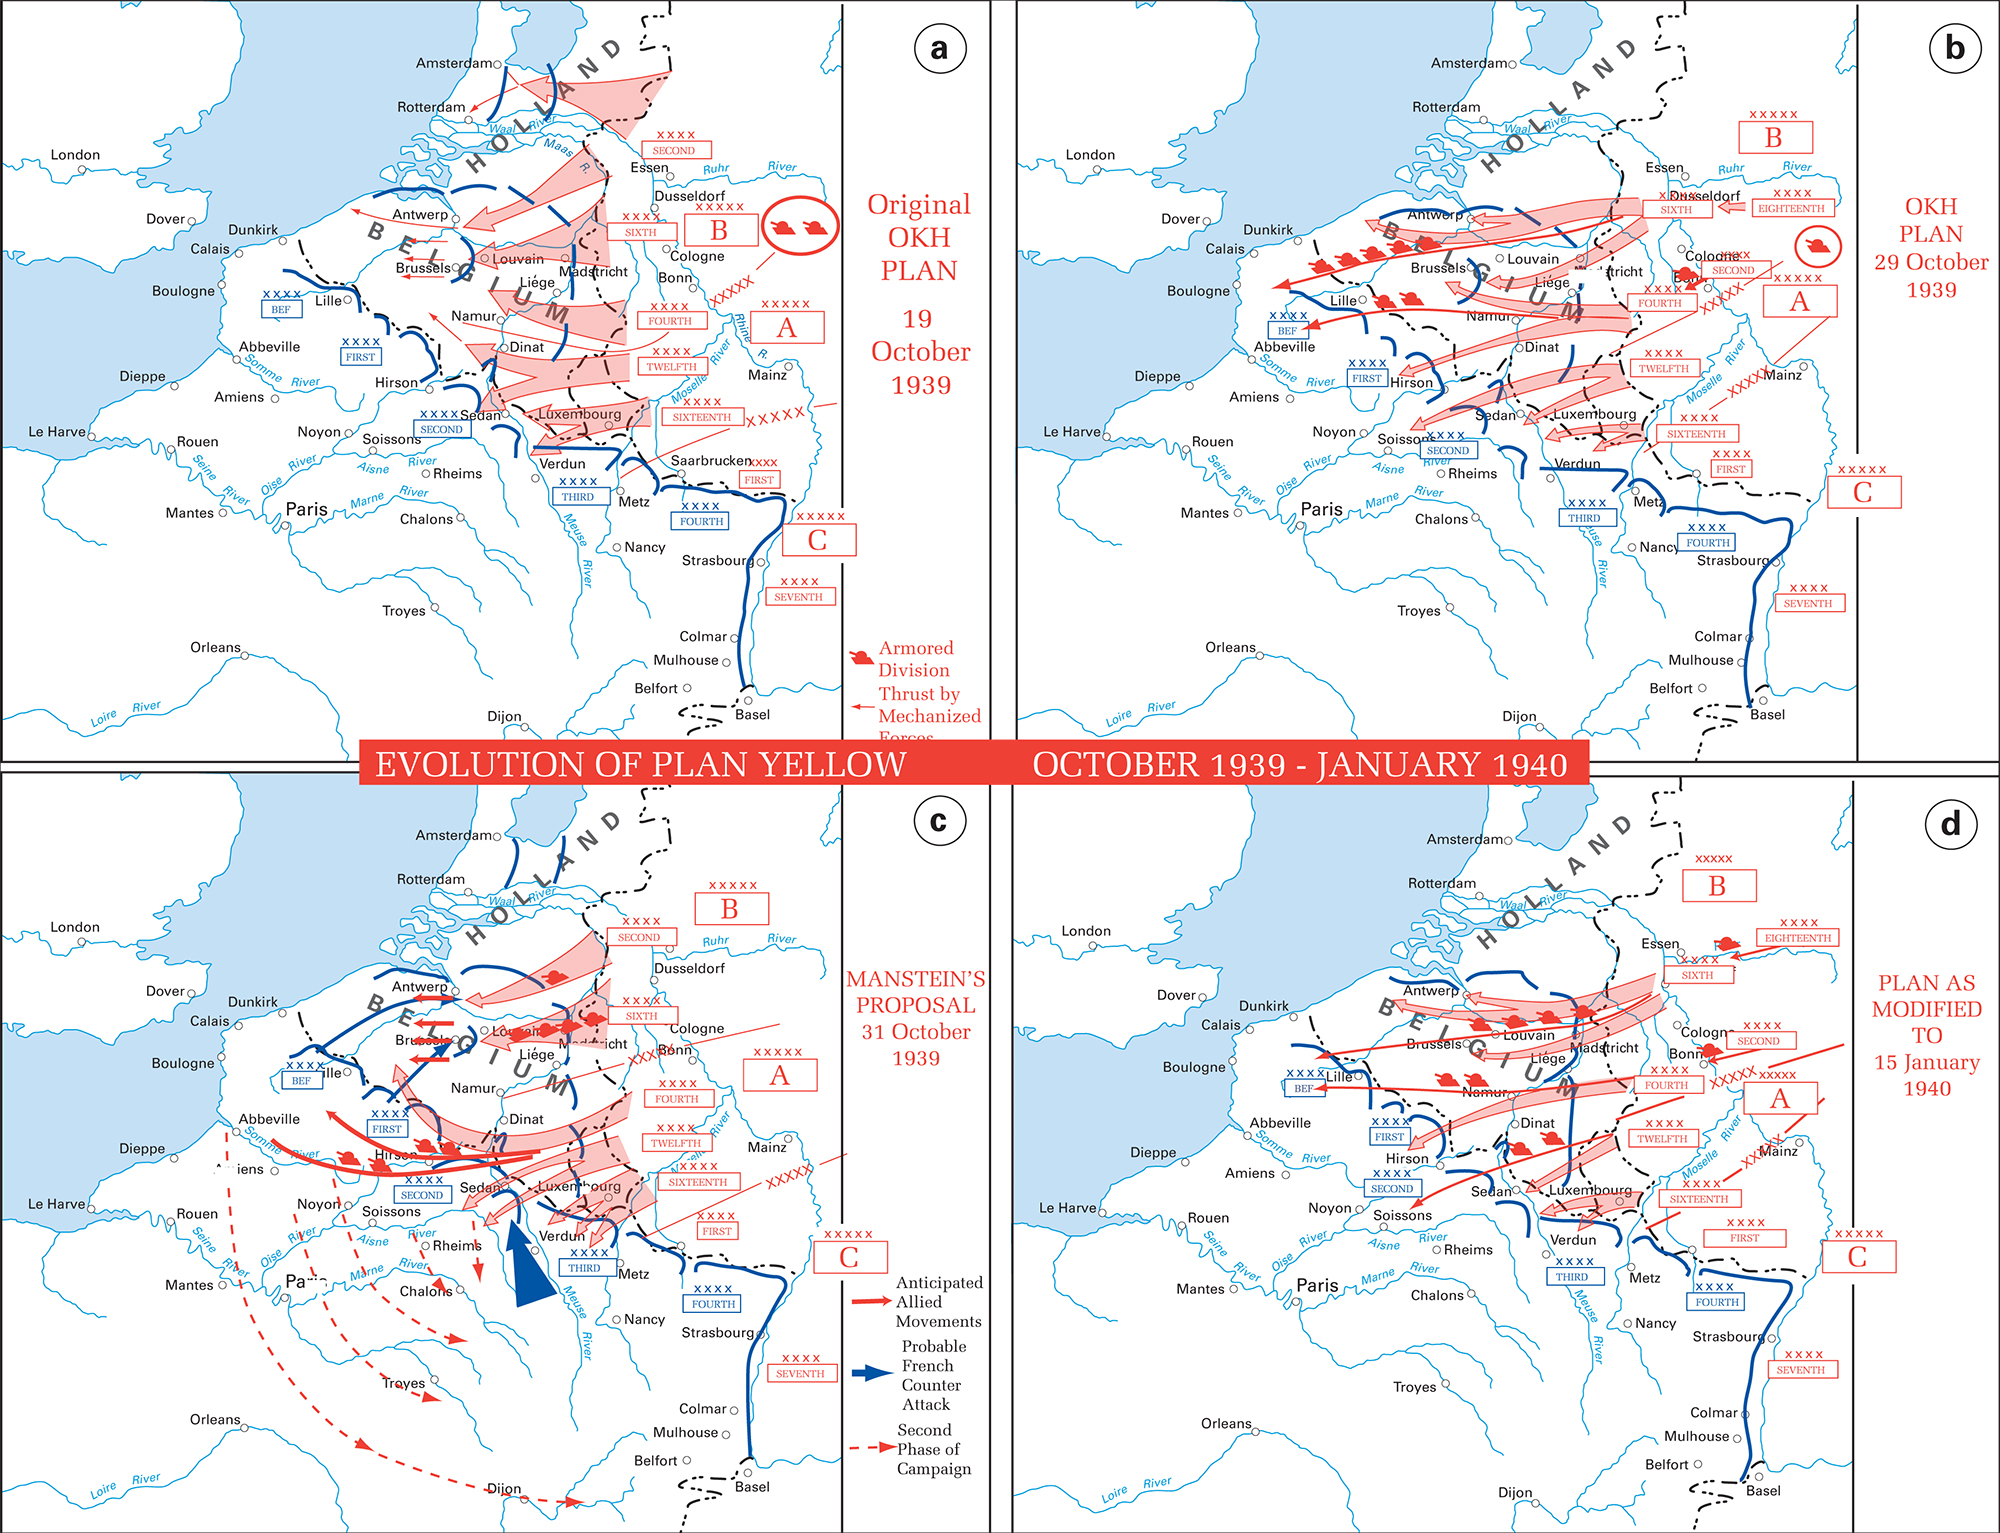 History Map of WWII: The War in the West - October 1939-January 1940